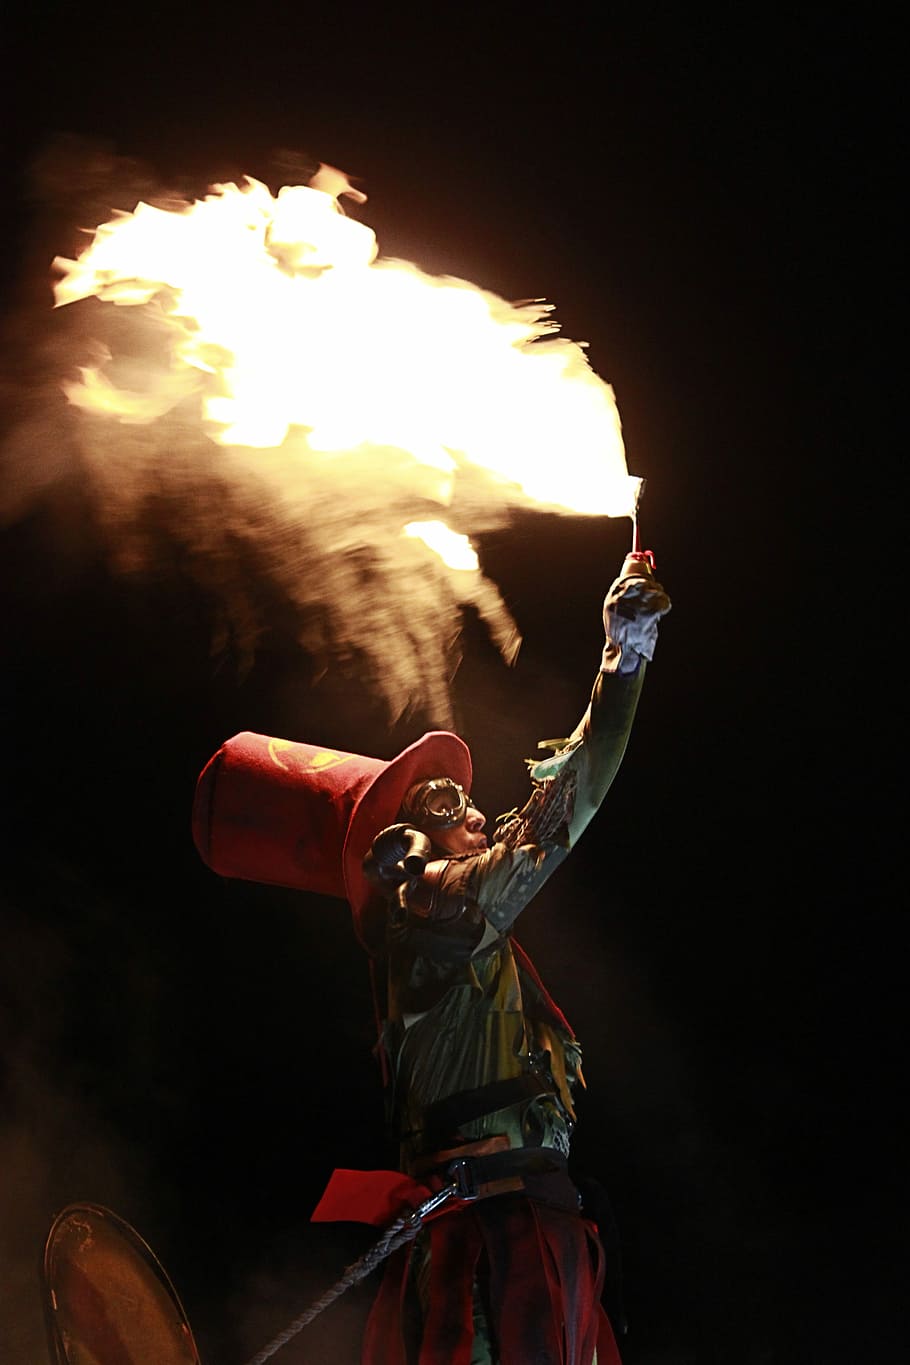 Fire, Flame, Combustion, fire, flame, performance, performing arts event, only men, arts culture and entertainment, one man only, adult